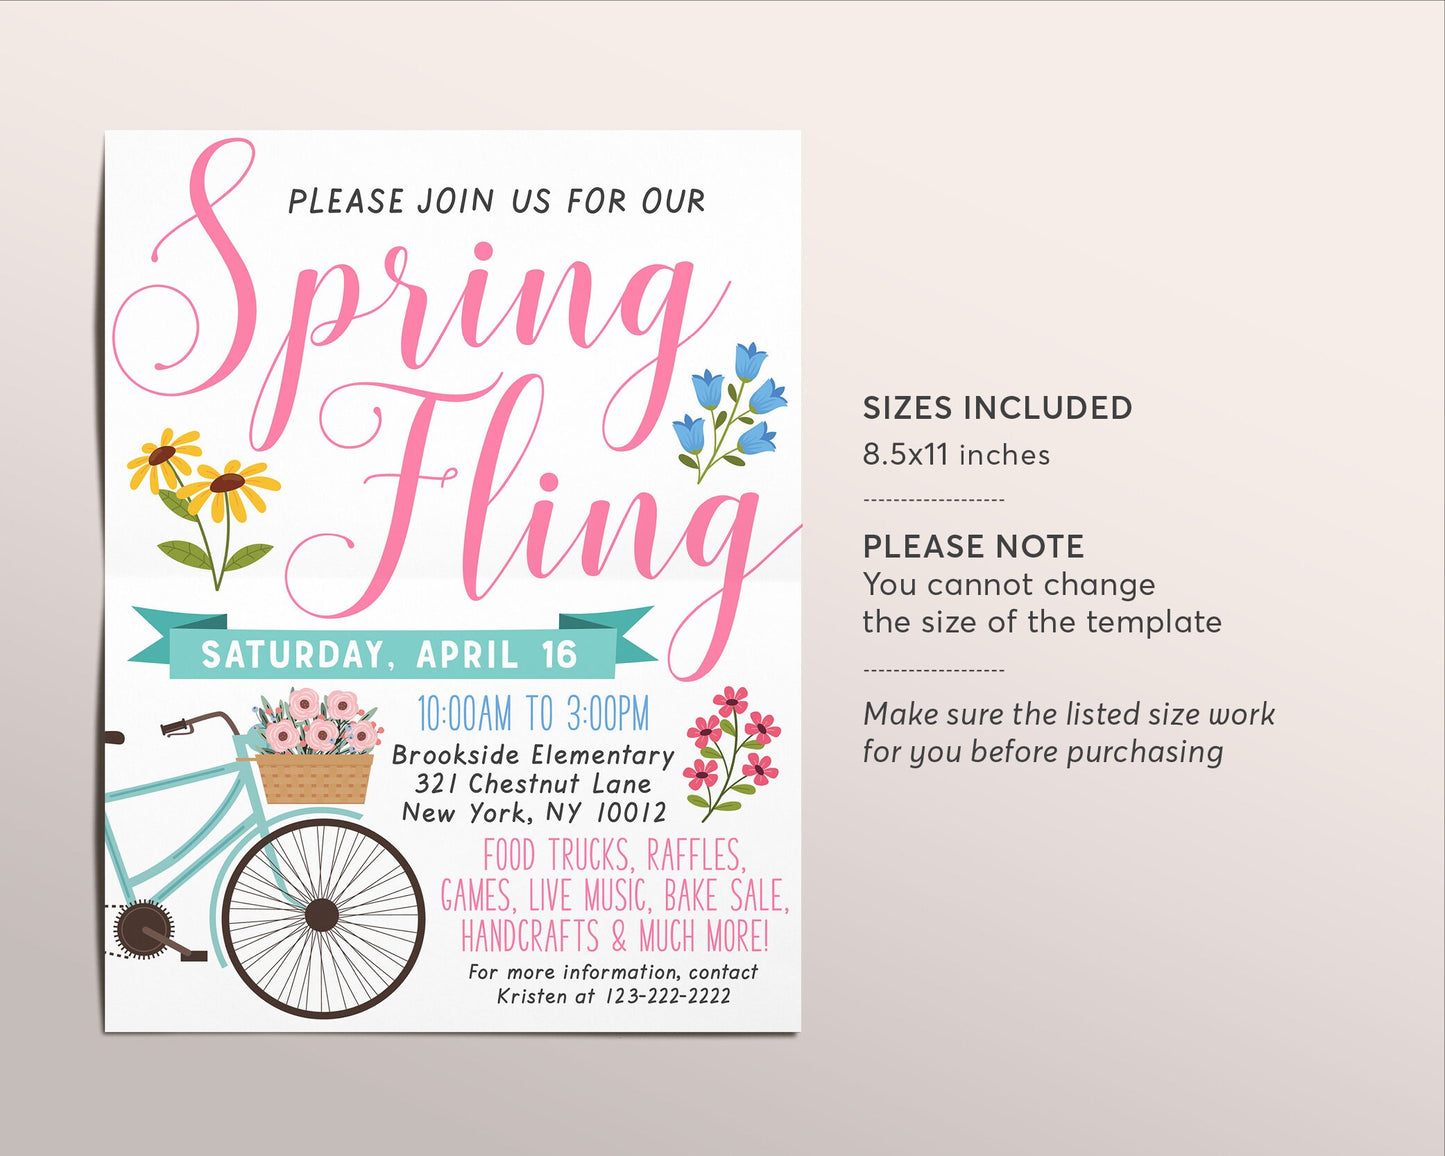 Spring Fling Flyer Editable Template, Easter Spring Festival Fundraiser Event Poster Crafts Market, School PTO PTA Church Nonprofit Charity